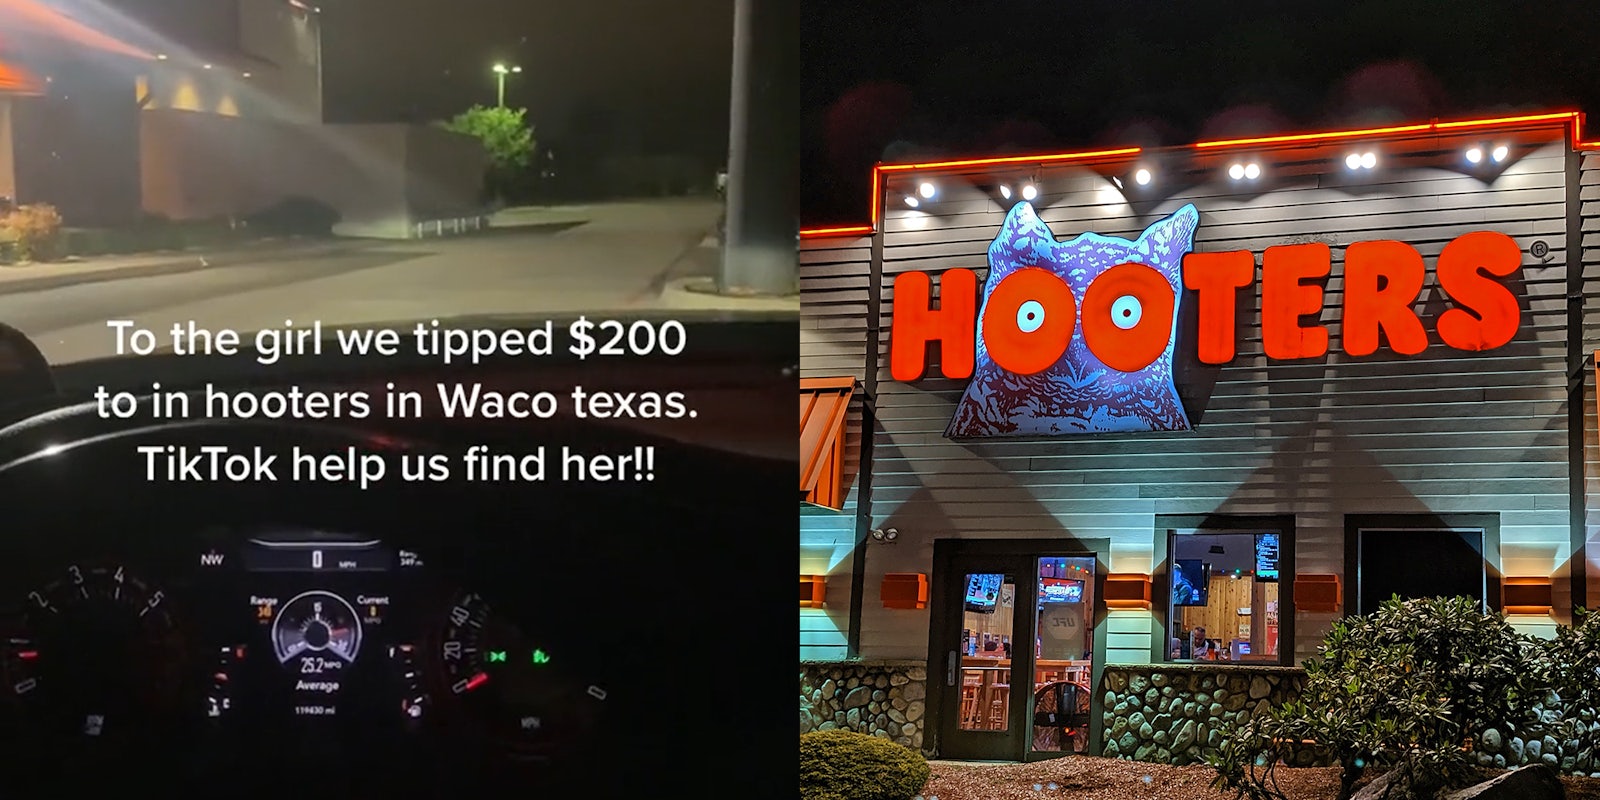 car dashboard with caption 'To the girl we tipped $200 to in hooters in Waco texas. TikTok help us find her!!' (l) Hooters restaurant (r)